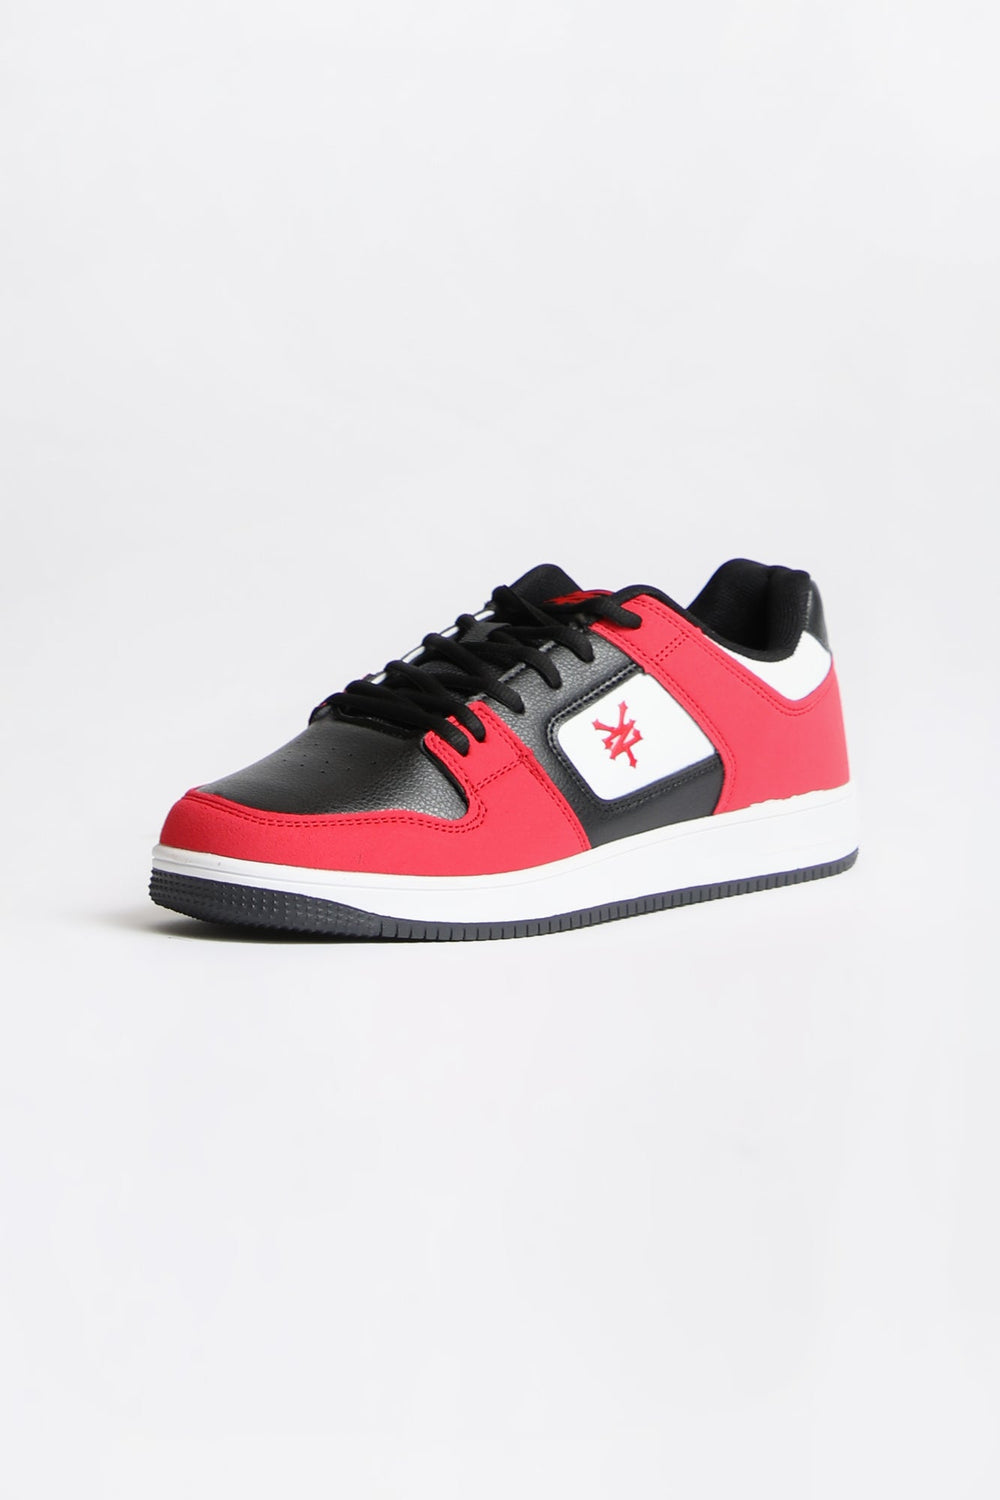 Zoo York Youth Skate Shoes Zoo York Youth Skate Shoes